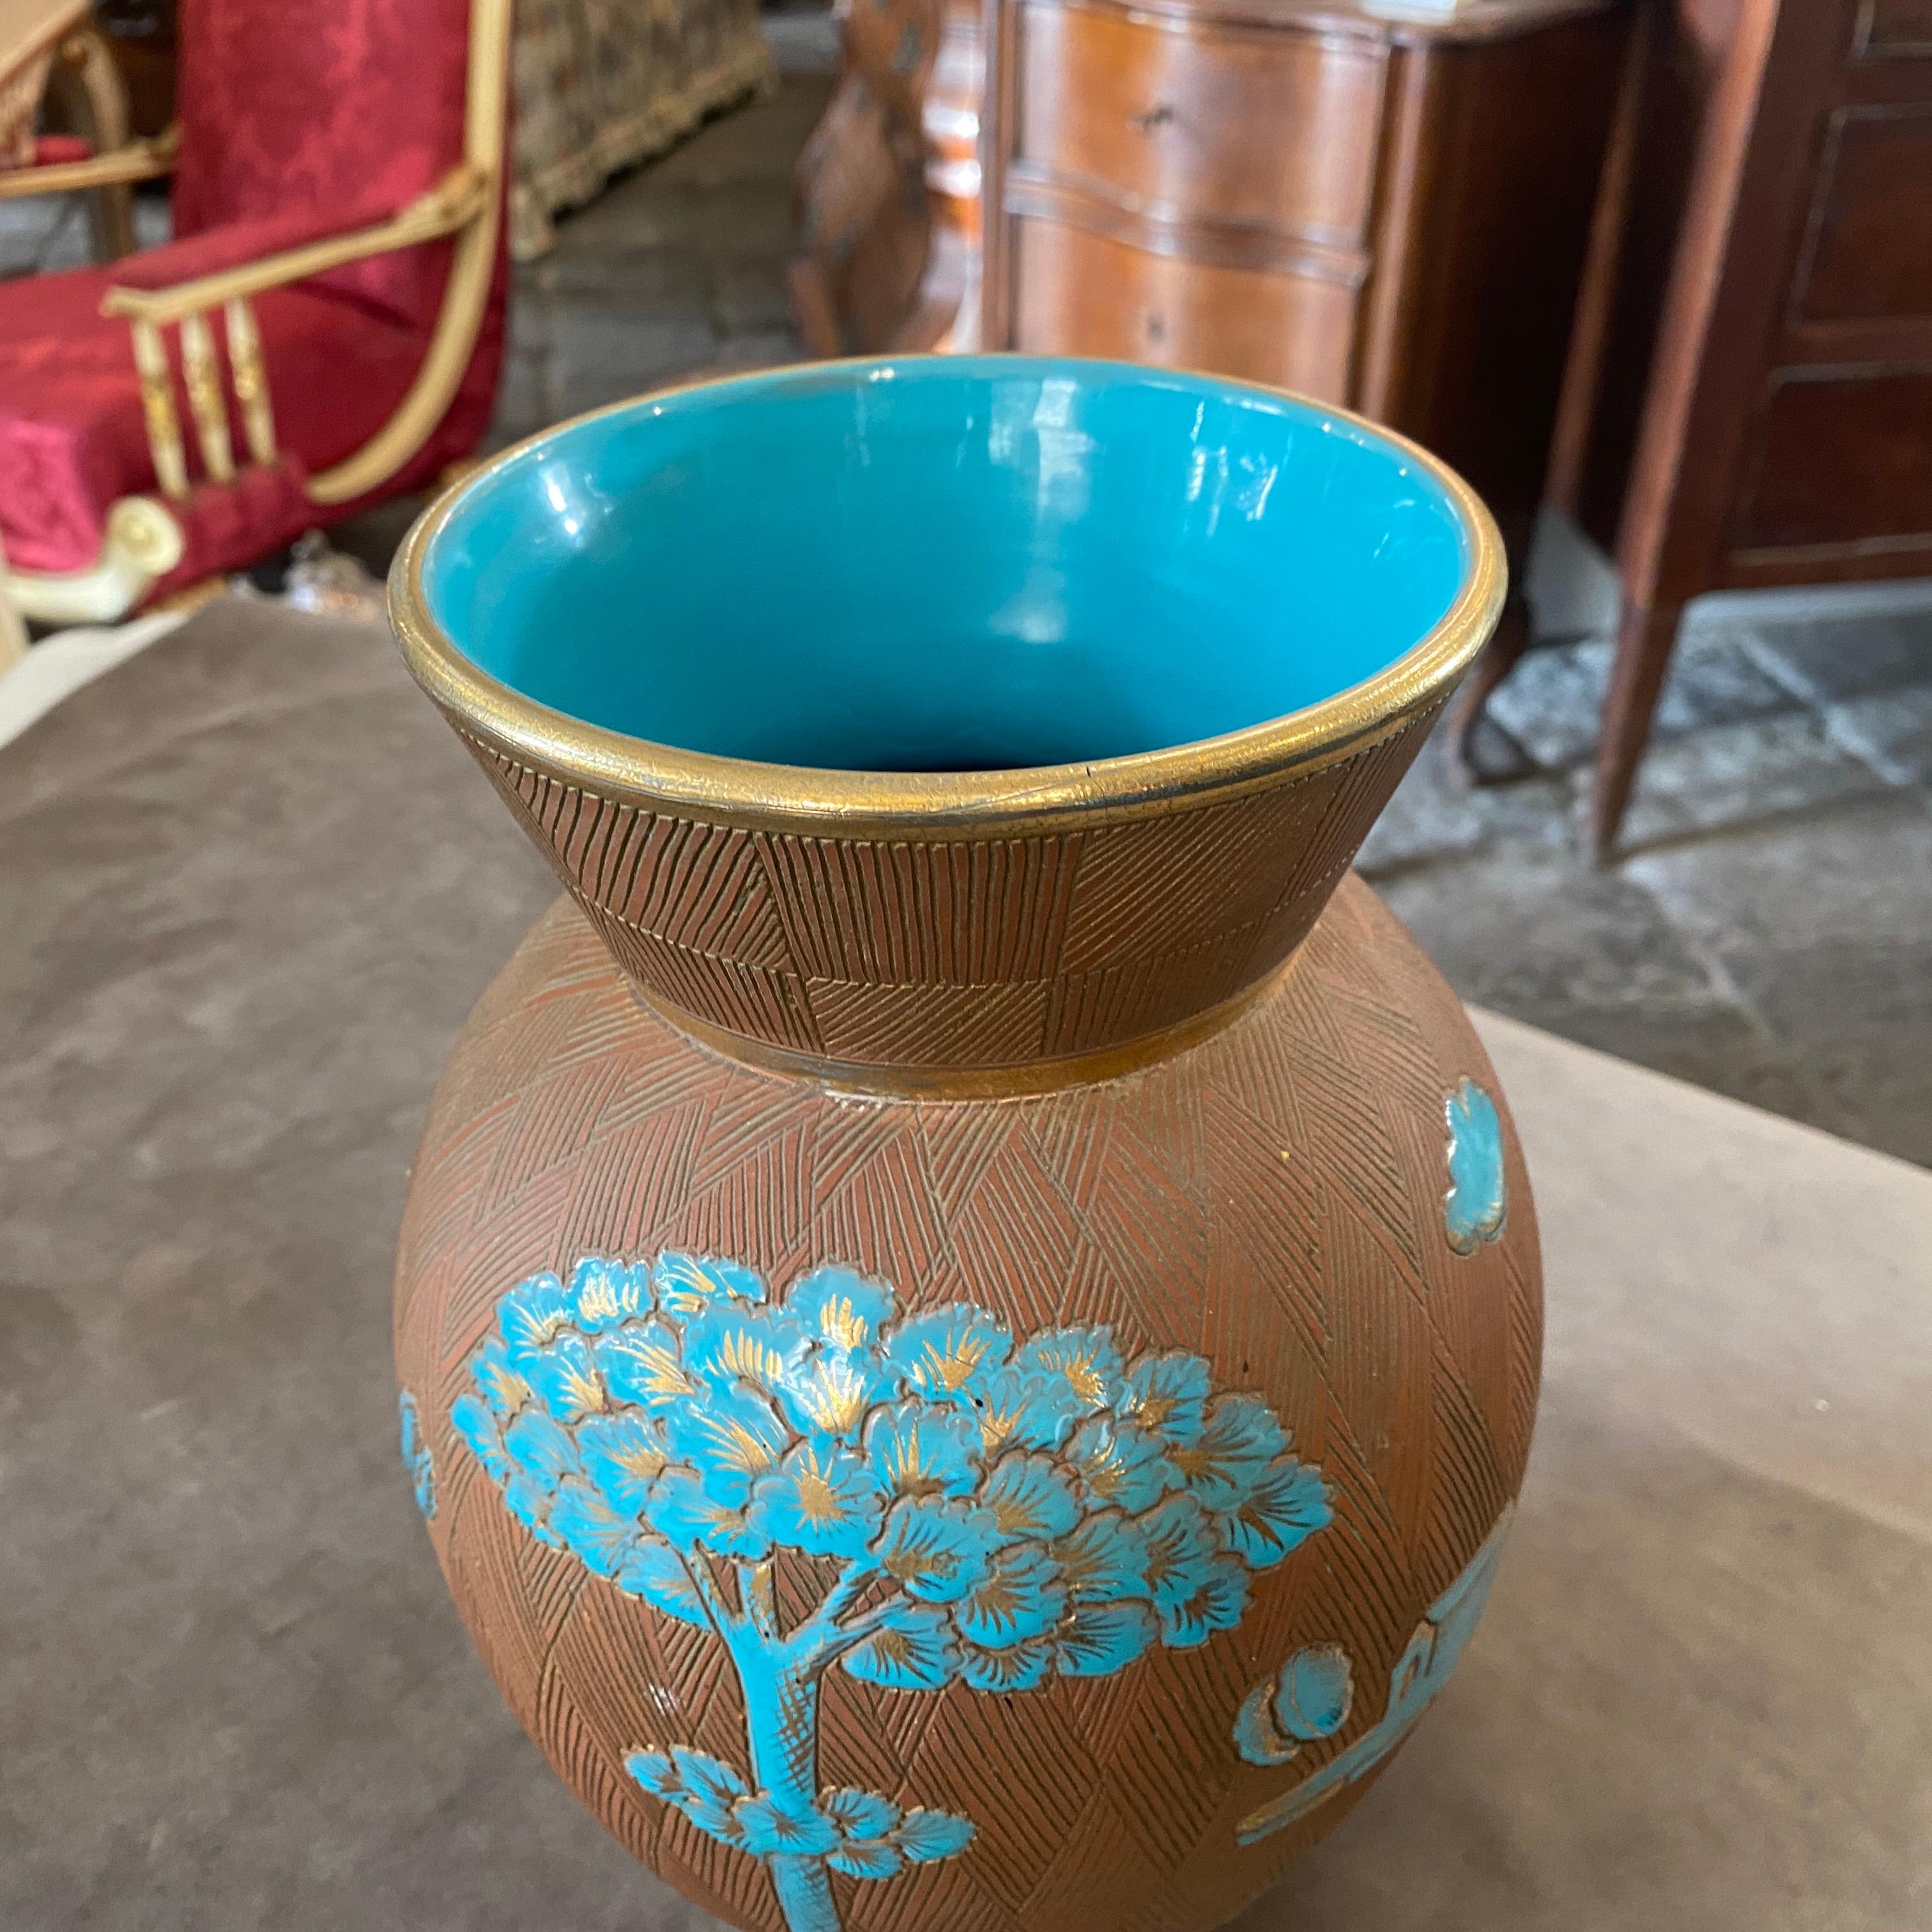 Hand-Painted 1950s Mid-Century Modern Blue and Brown Ceramic Italian Vase by Fantechi For Sale